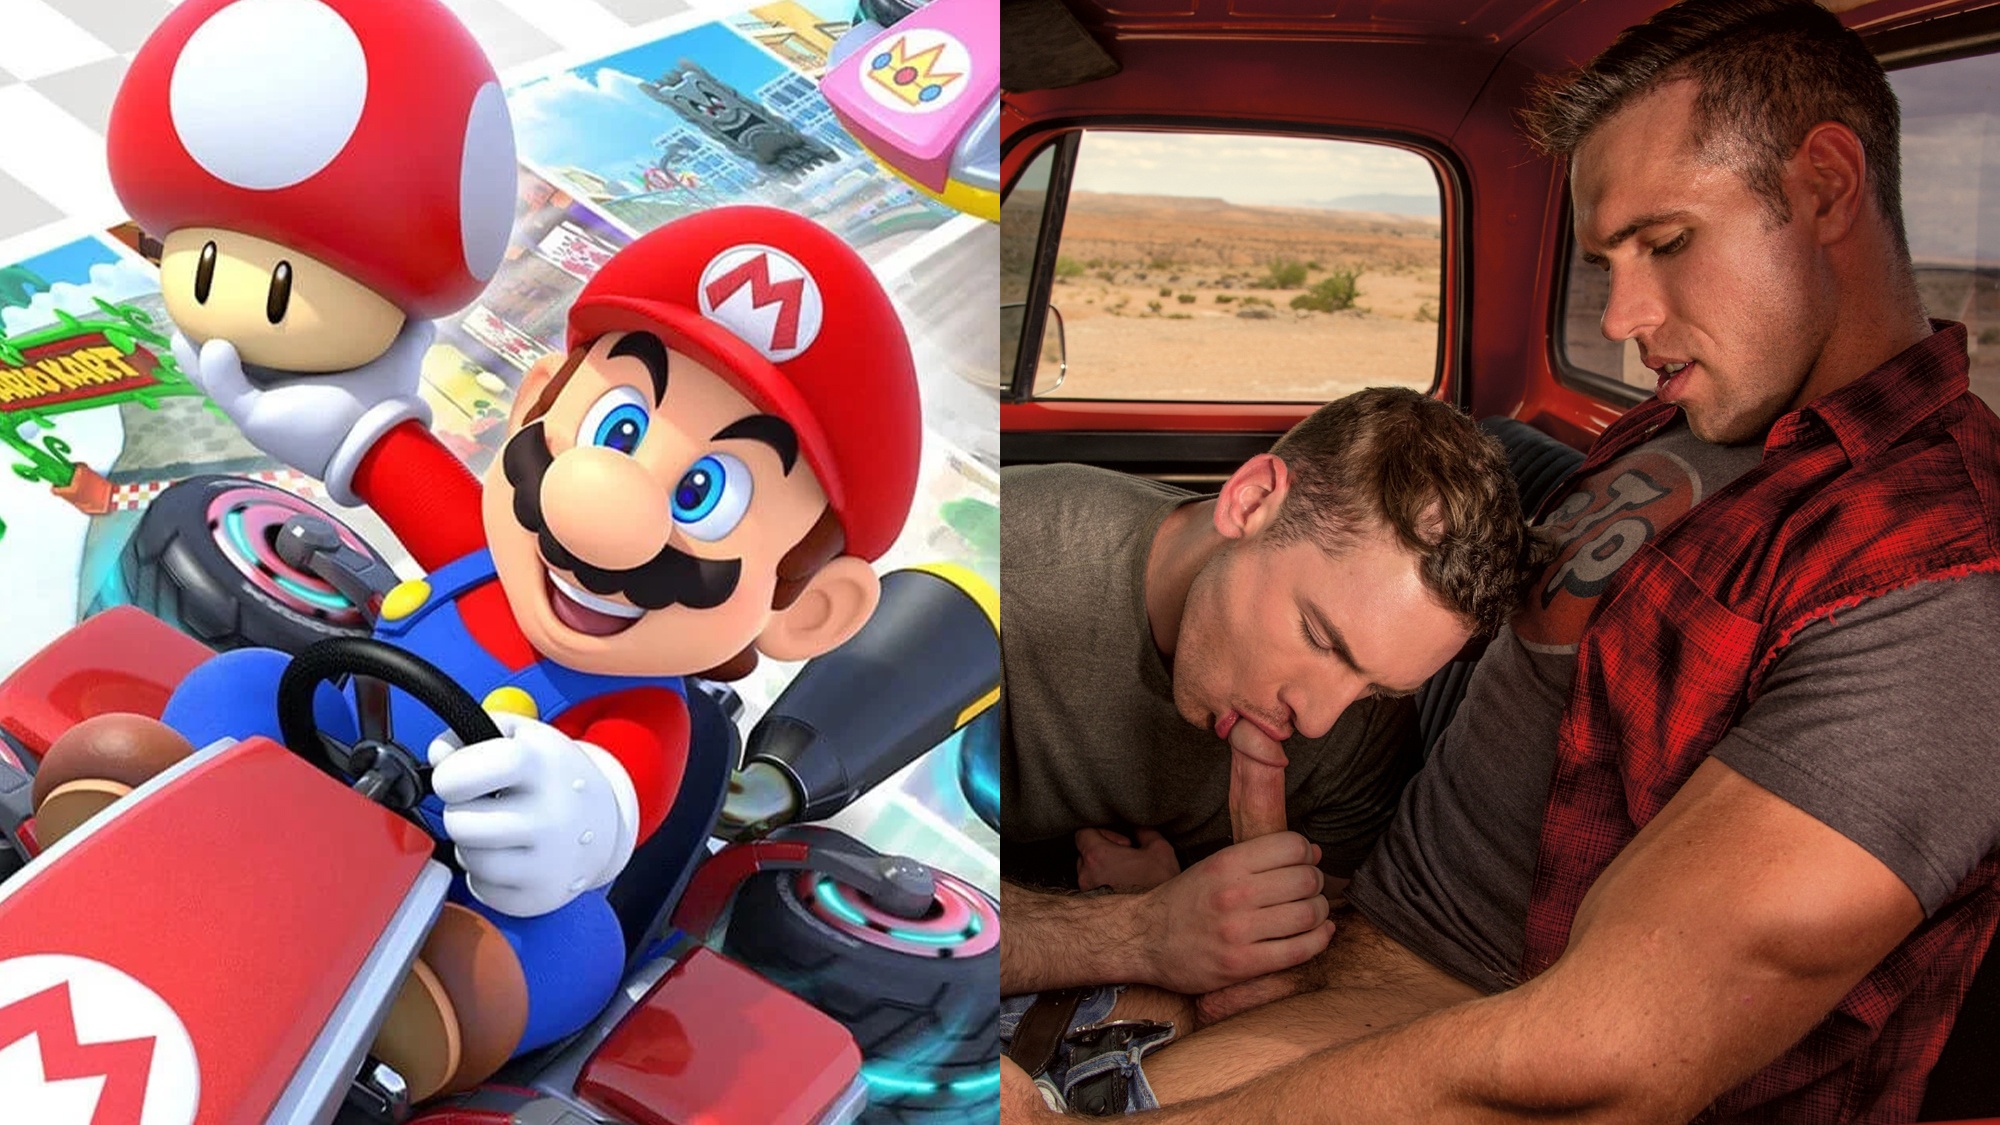 All The Porn You Should Watch If You're Enjoying The New Mario Kart DLC -  TheSword.com